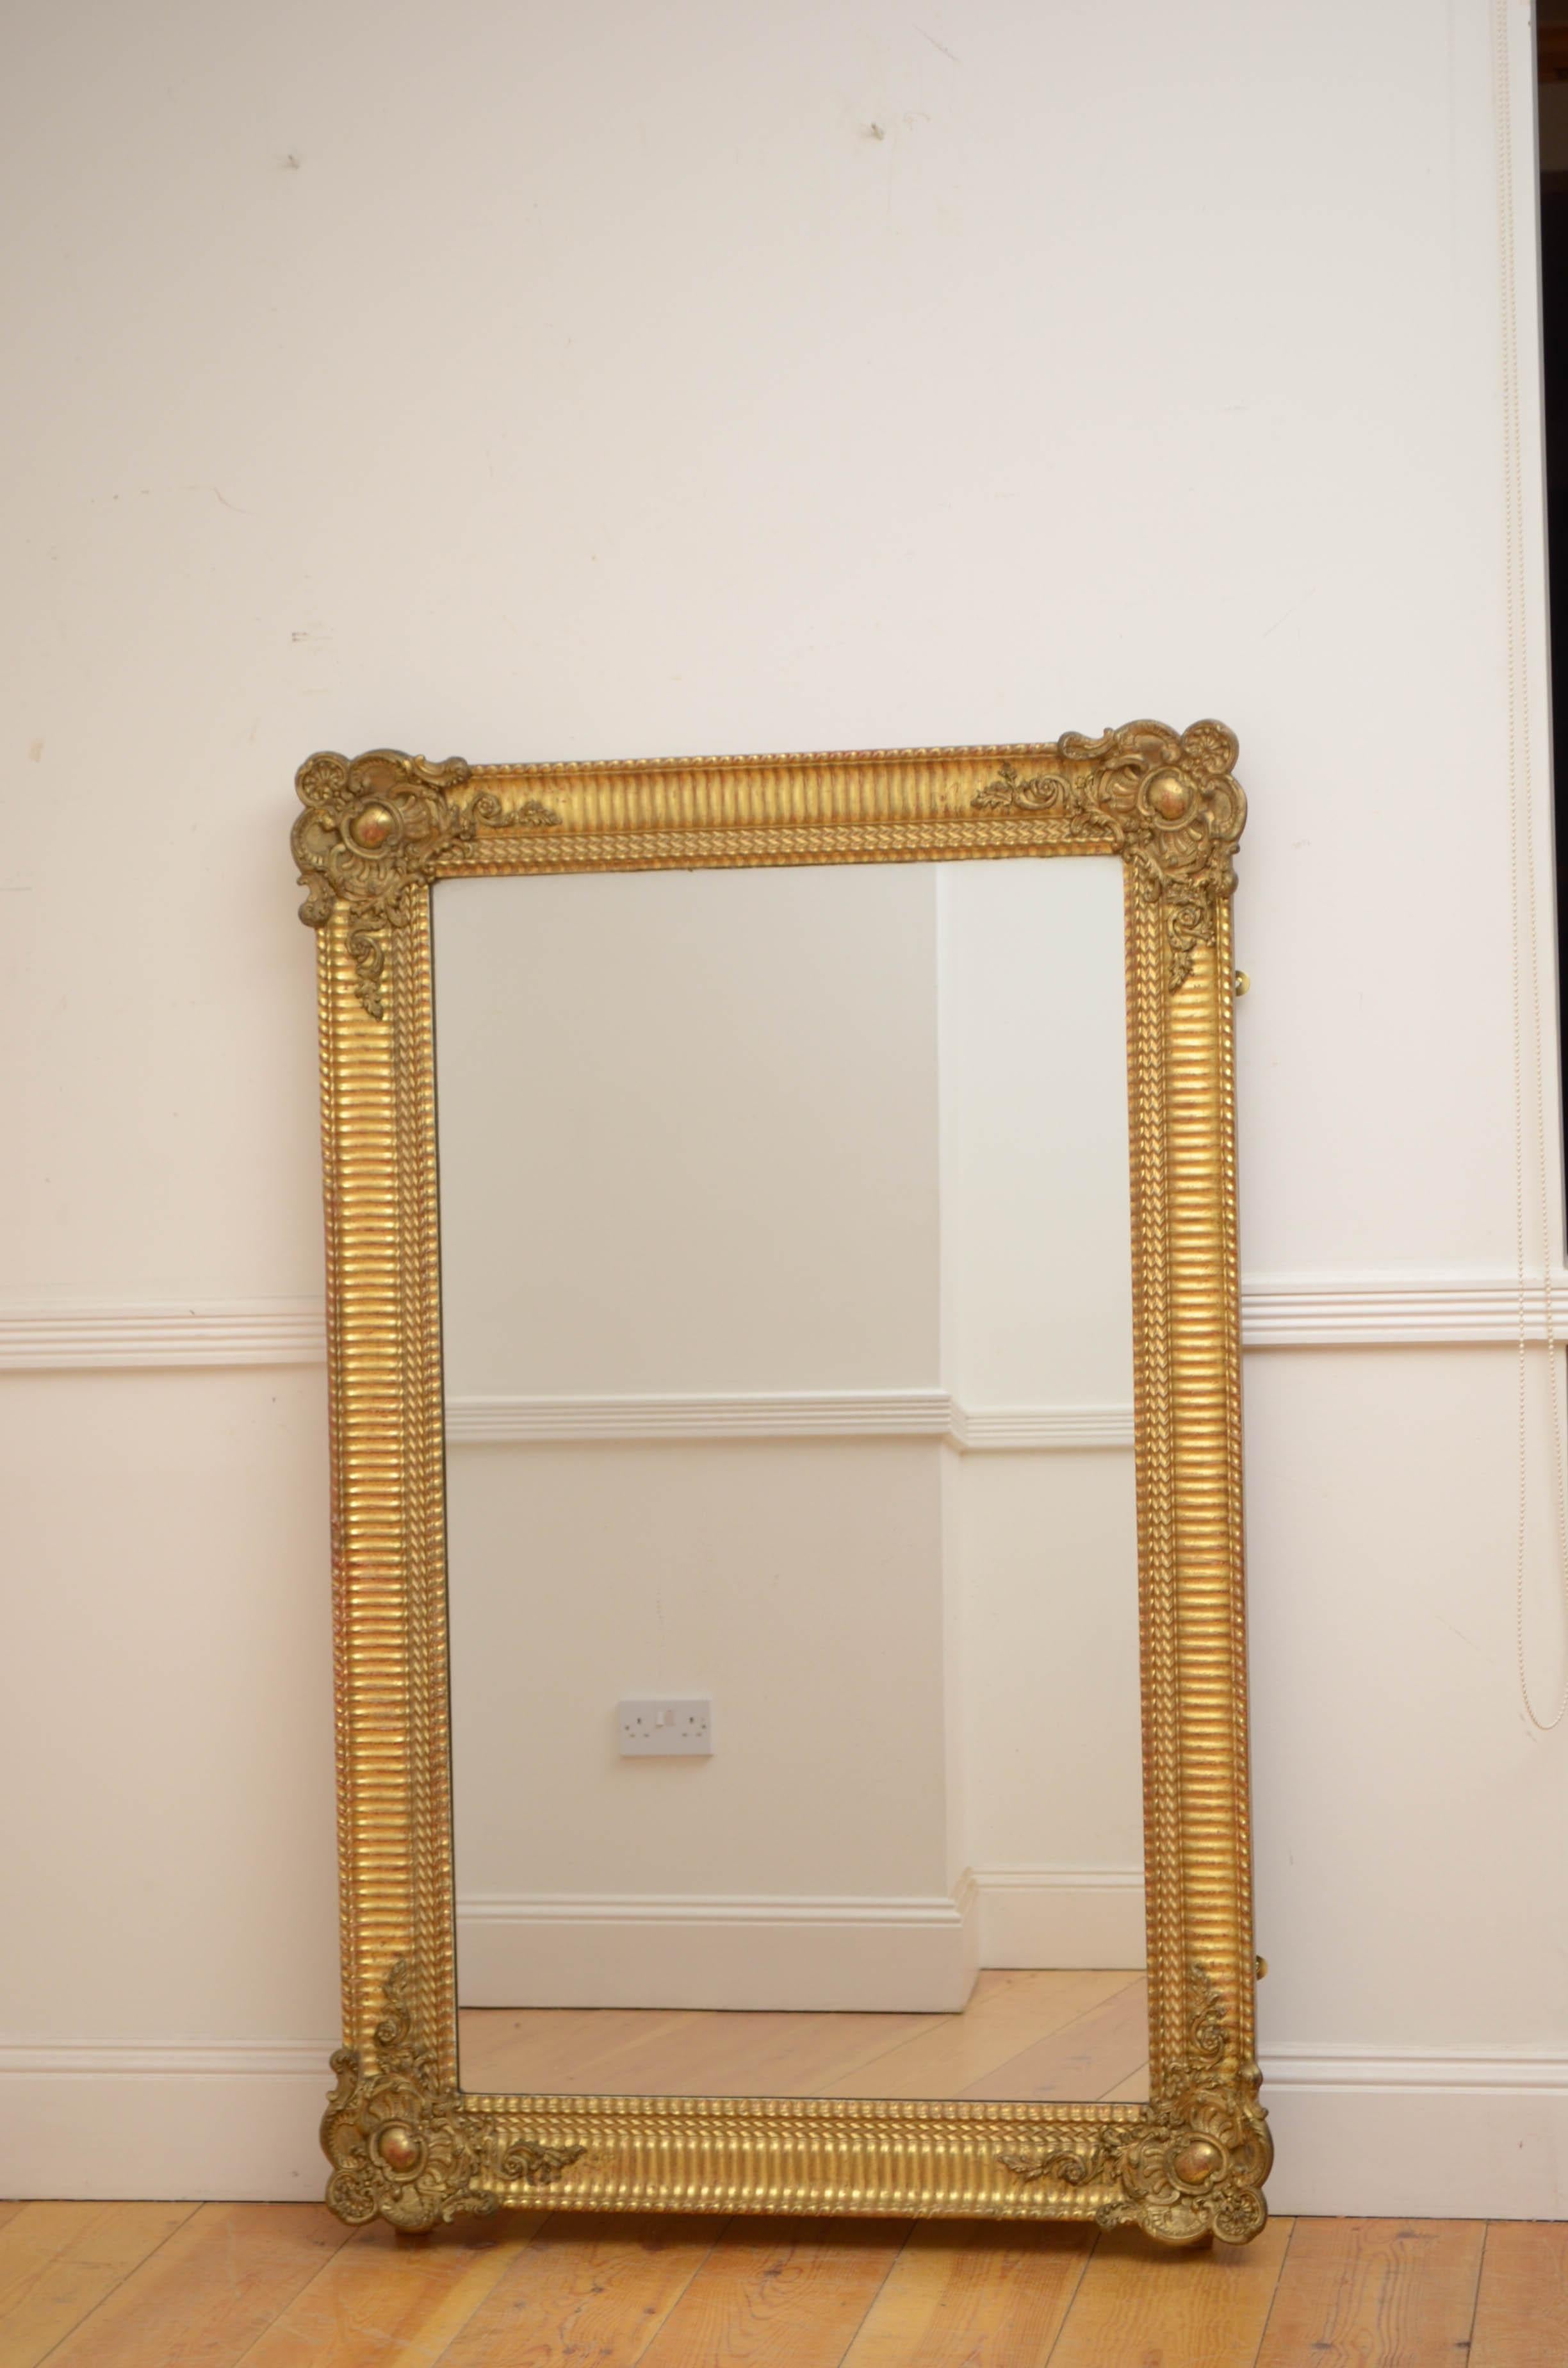 K0536 Super 19th century gilded wall mirror, having original mercury glass with some sparkle and air bubbles in beautifully carved gilt frame with scroll decorated corners. This antique mirror can be positioned both vertically and horizontally. The